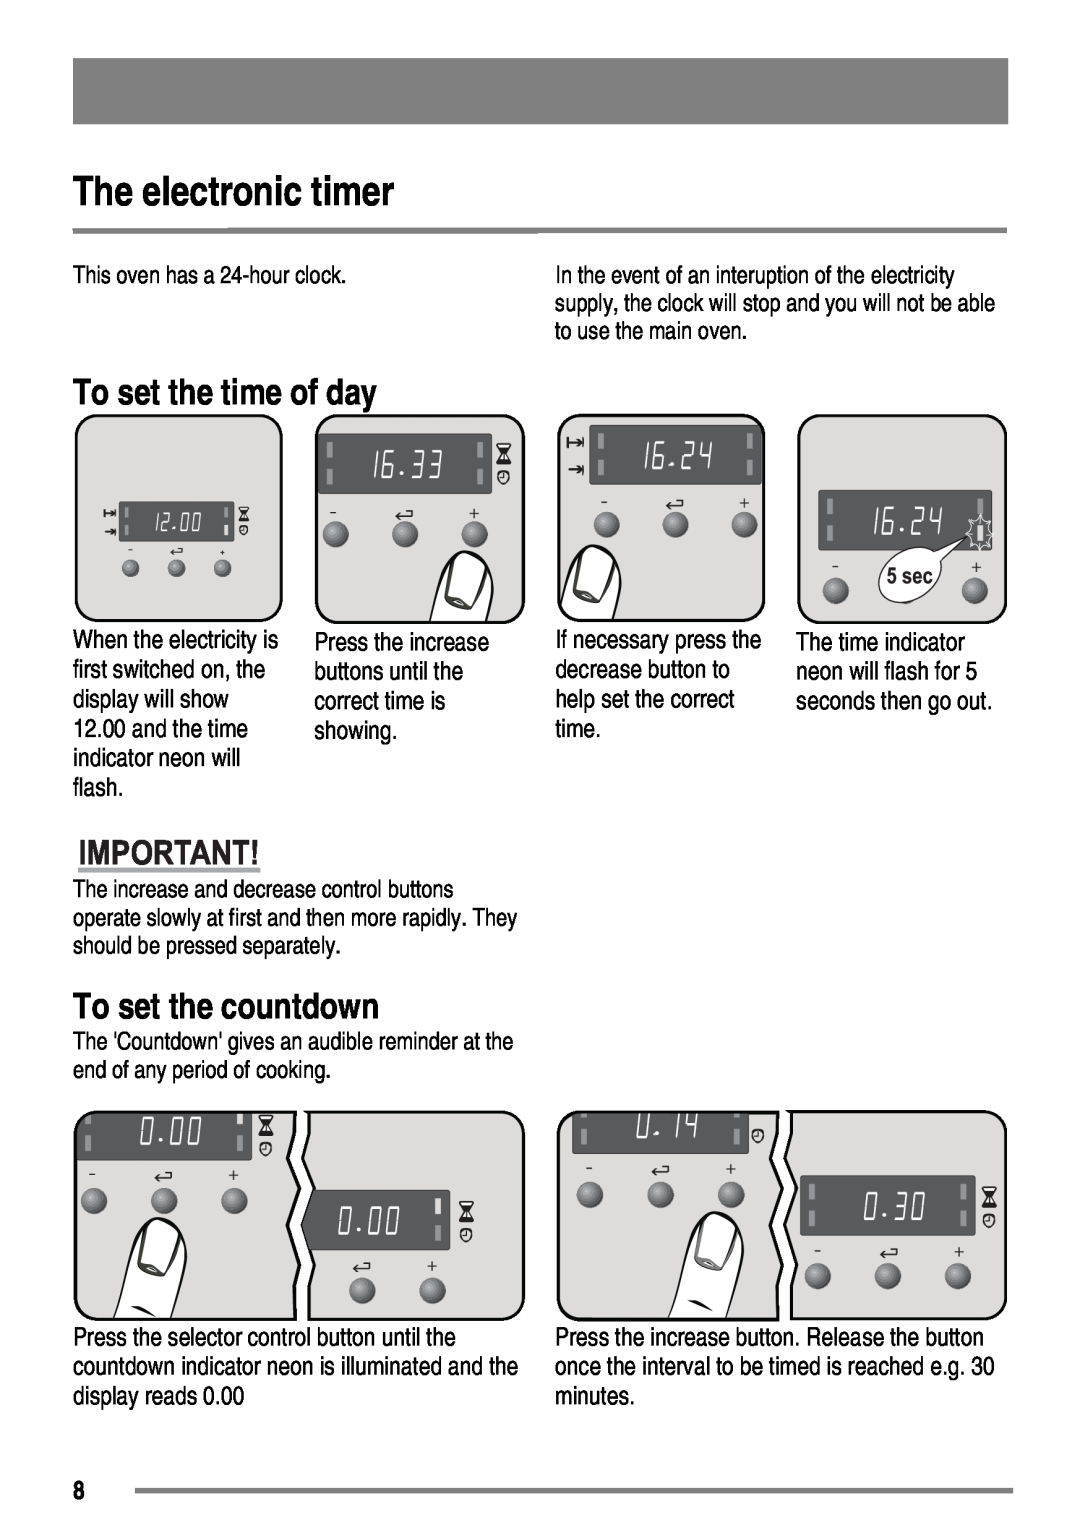 Zanussi ZKG6040 user manual The electronic timer, To set the time of day, To set the countdown 